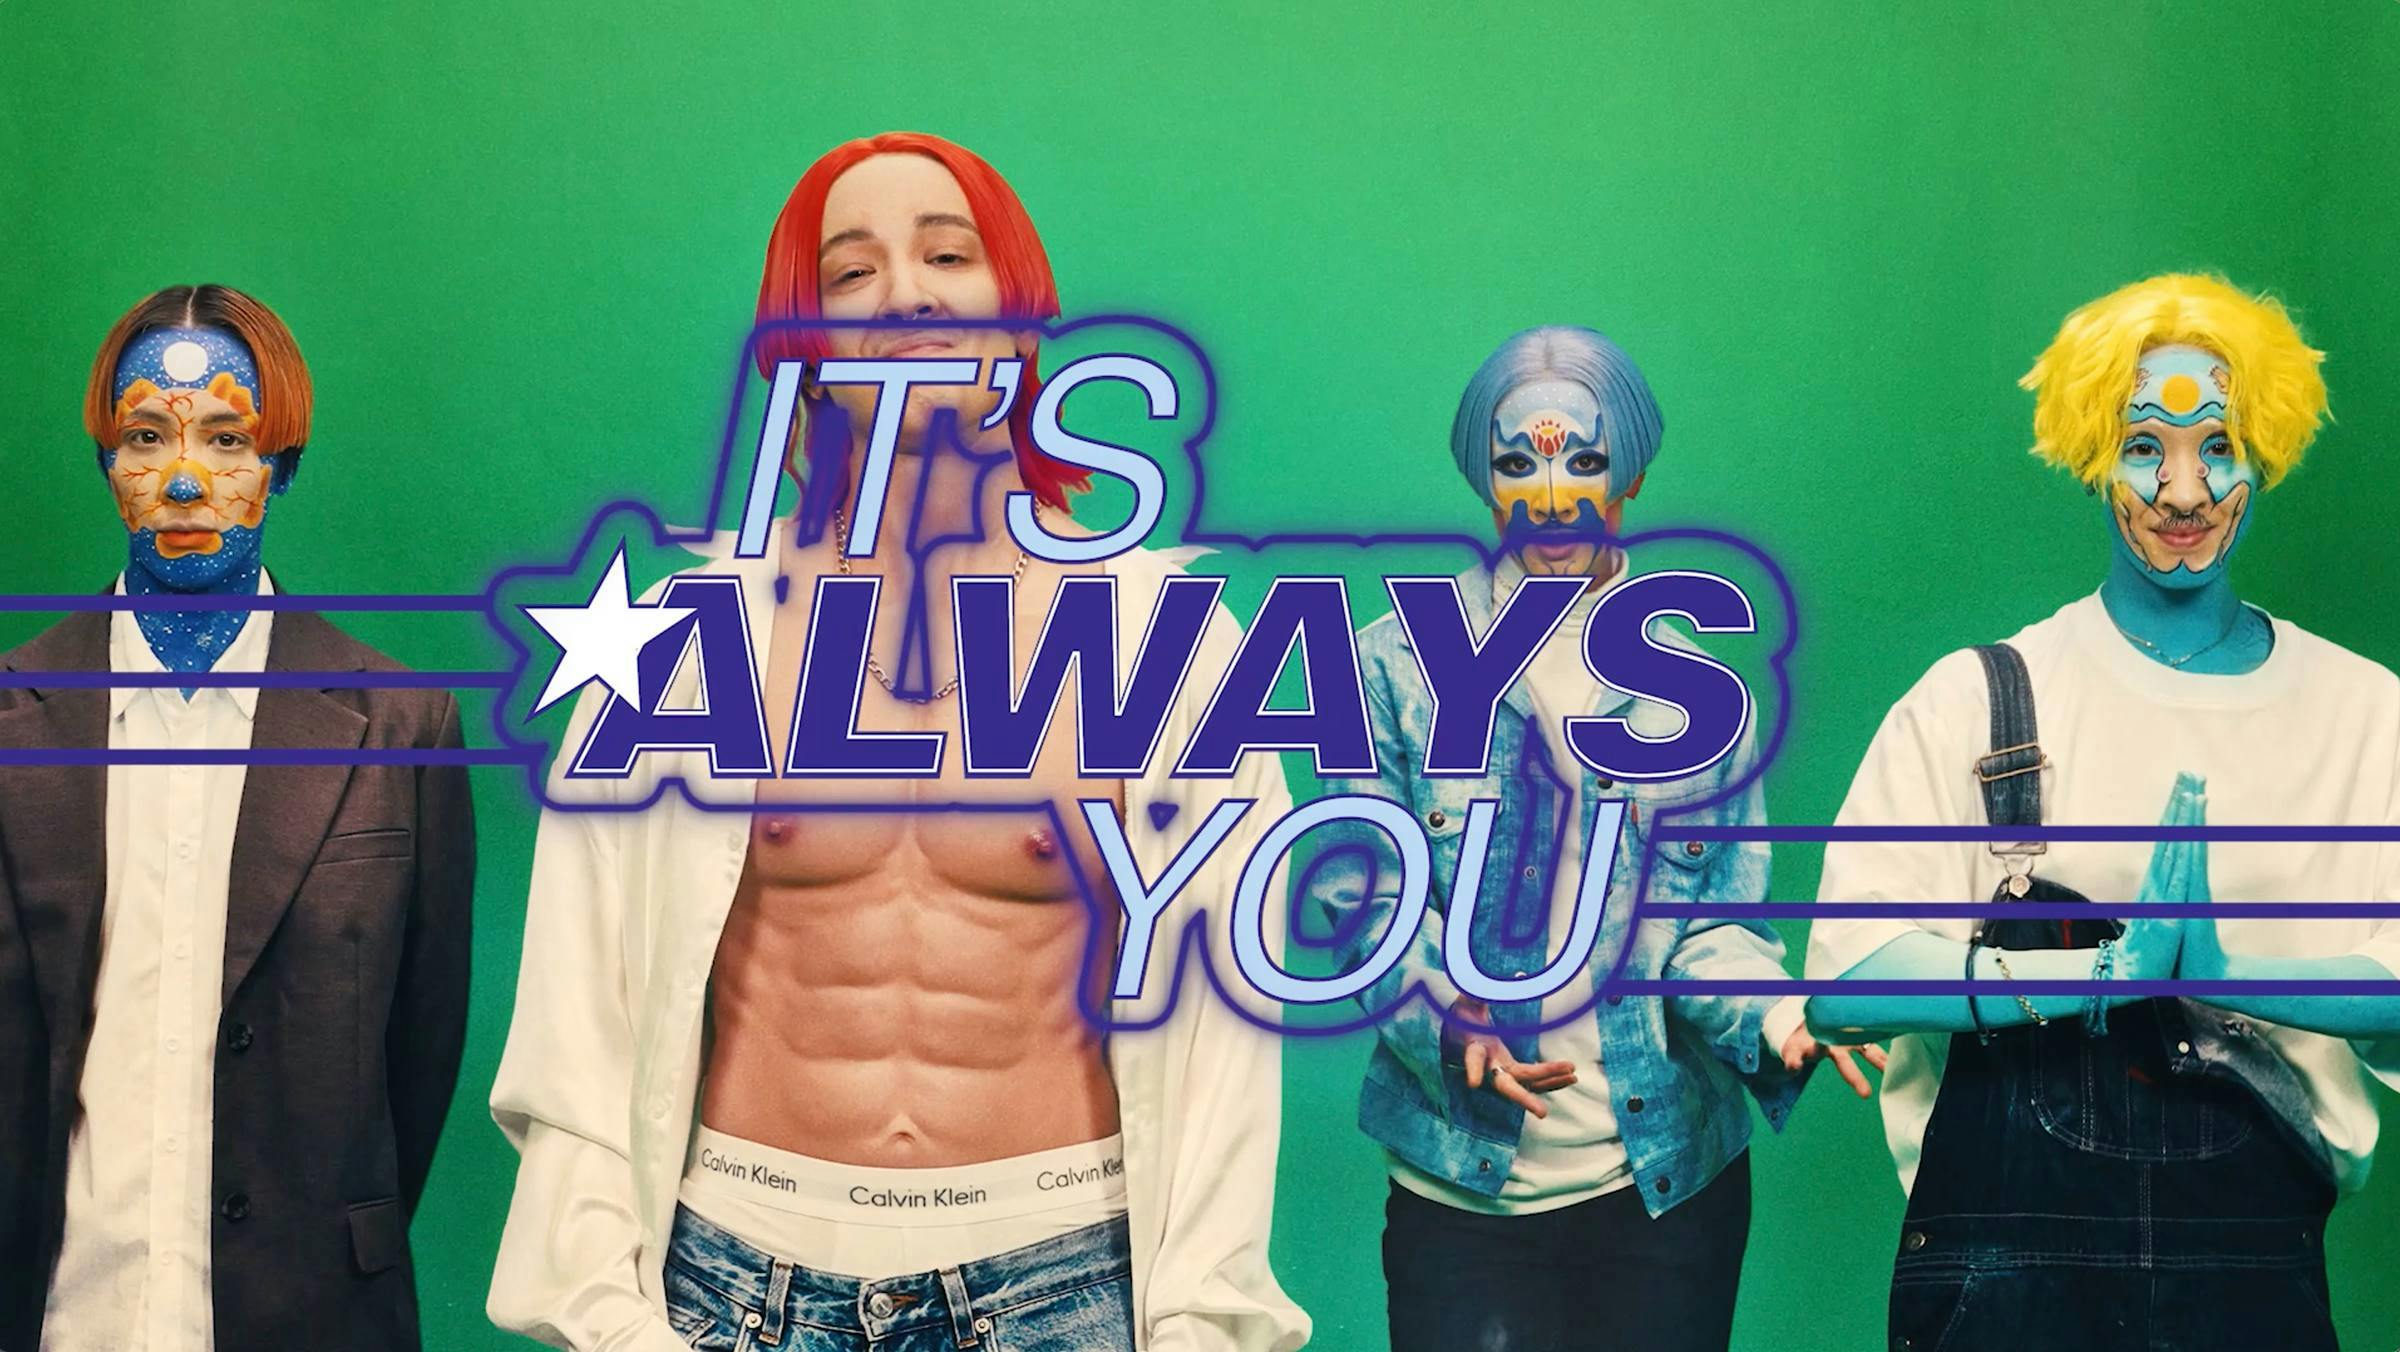 4 characters with orange, red, blue and yellow hair stand in a row, they are seemingly in a boy band. The text 'its always you' is layered in front of them. The back ground is green.